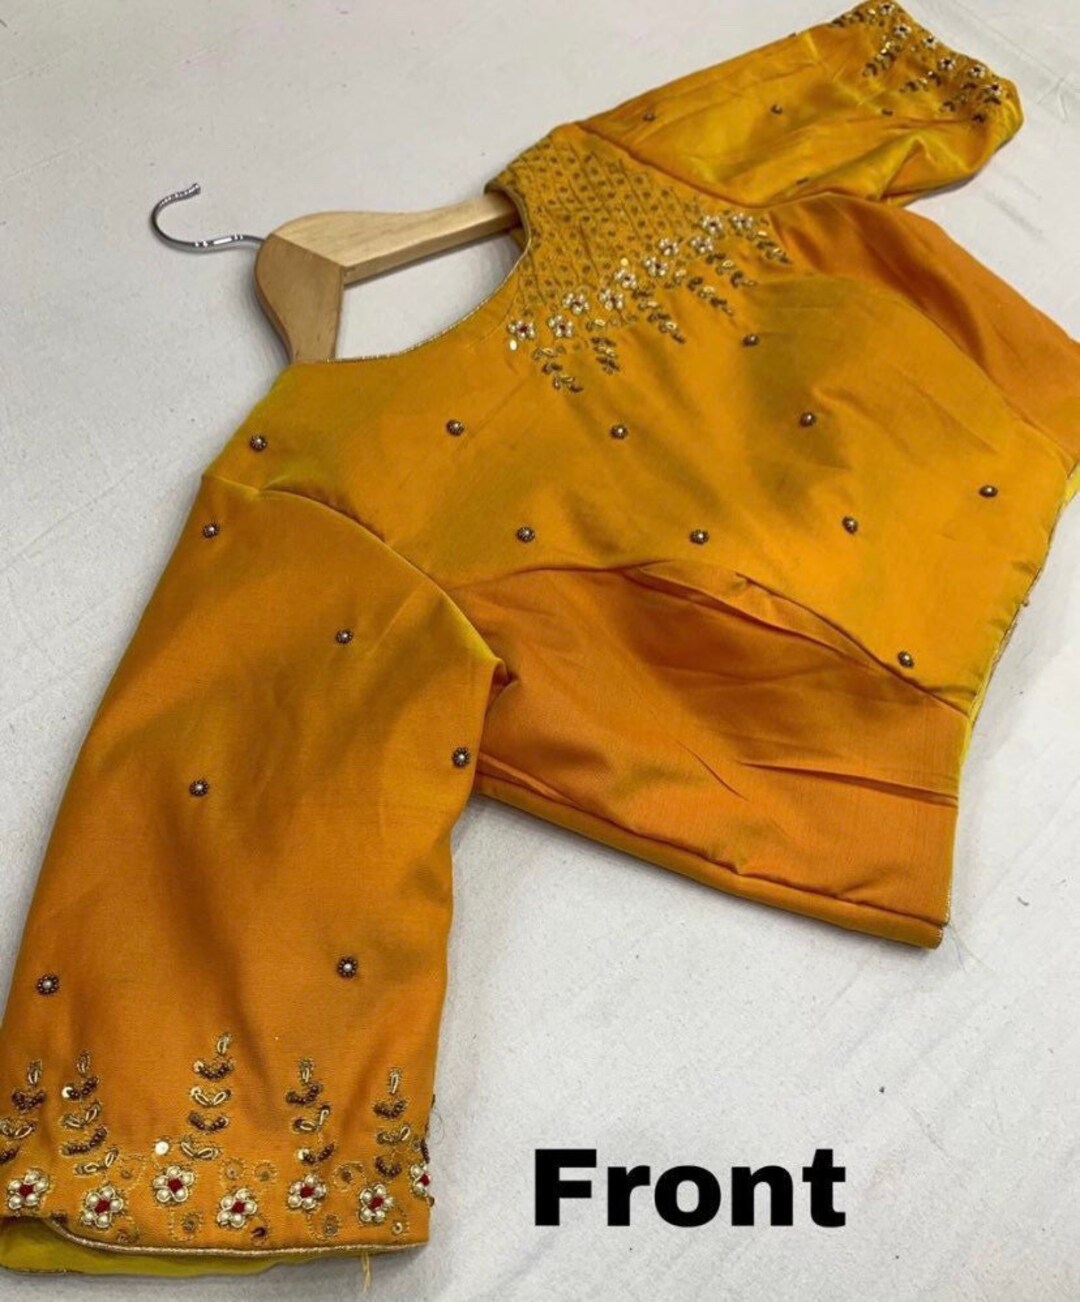 Buy Women's Readymade blouse with inbuilt Bra Cups and stylish front back  pattern with golden work can be mix matched with any saree (Size Small, 34  inch) at